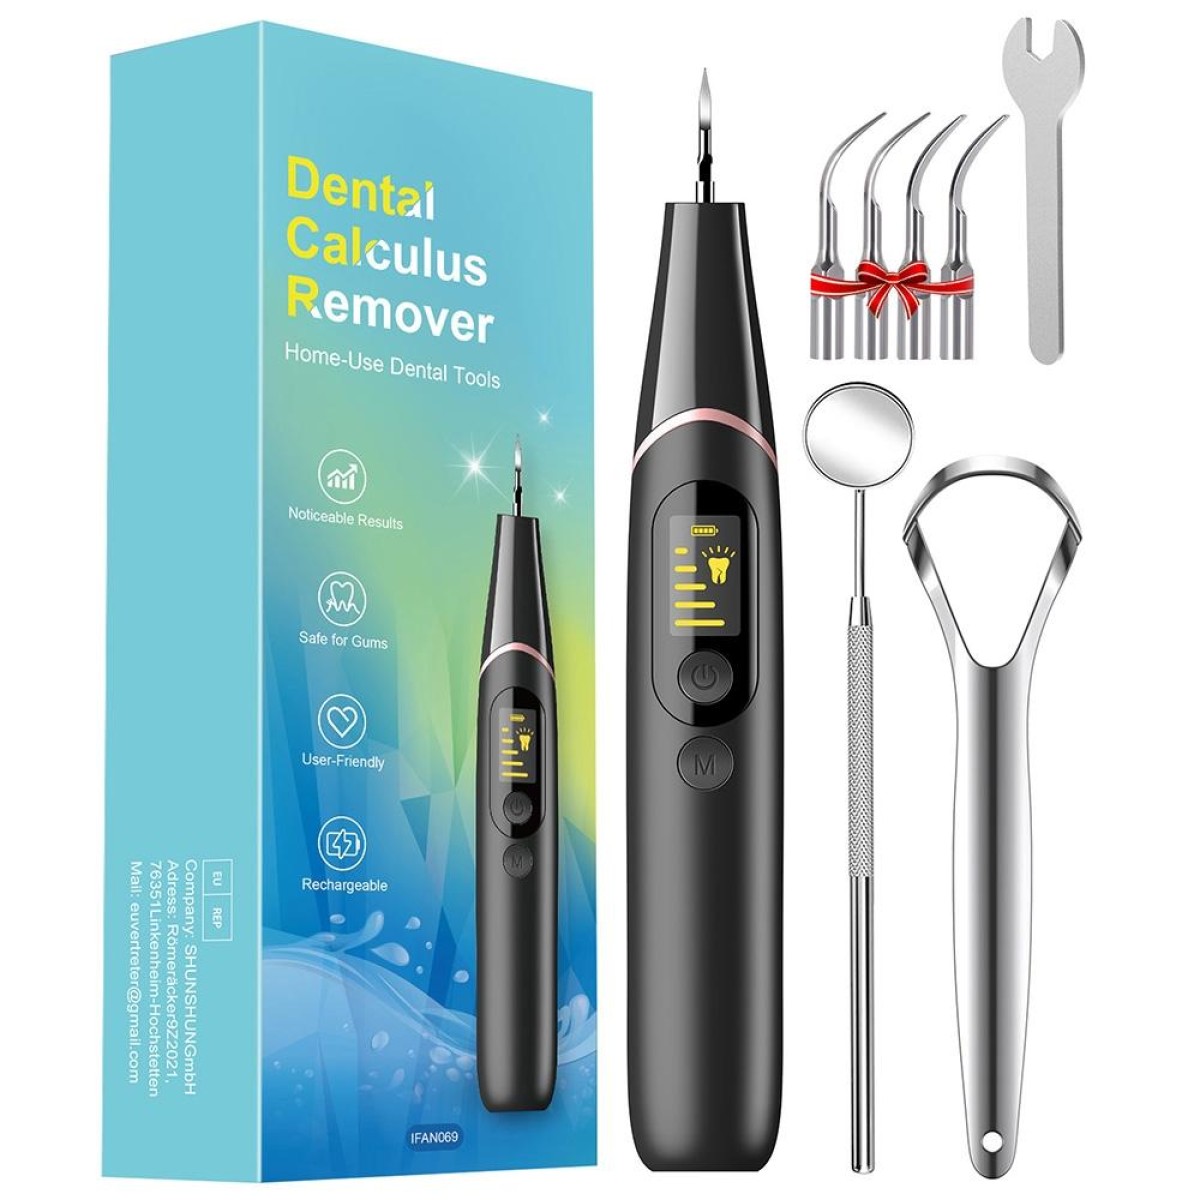 Ultrasonic Calculus Removal Dental Scaler Home Dental Cleaning Instrument